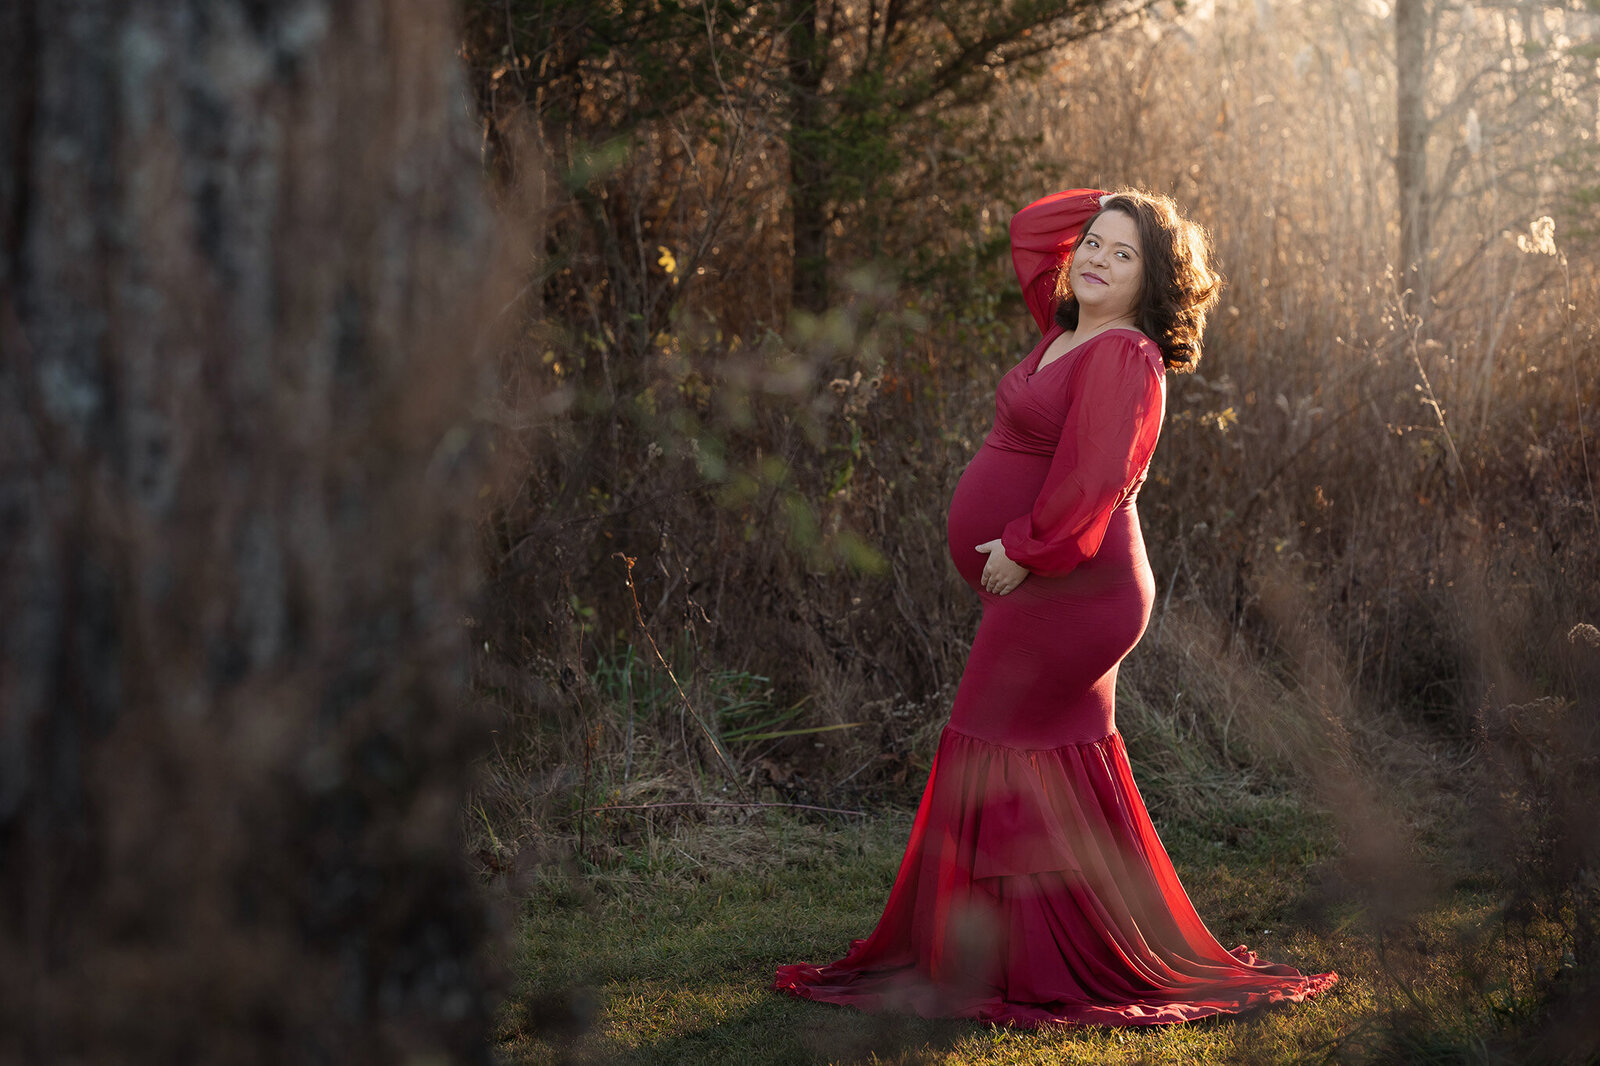 NJ Baby photographer captures expecting mother holding her belly in magical light